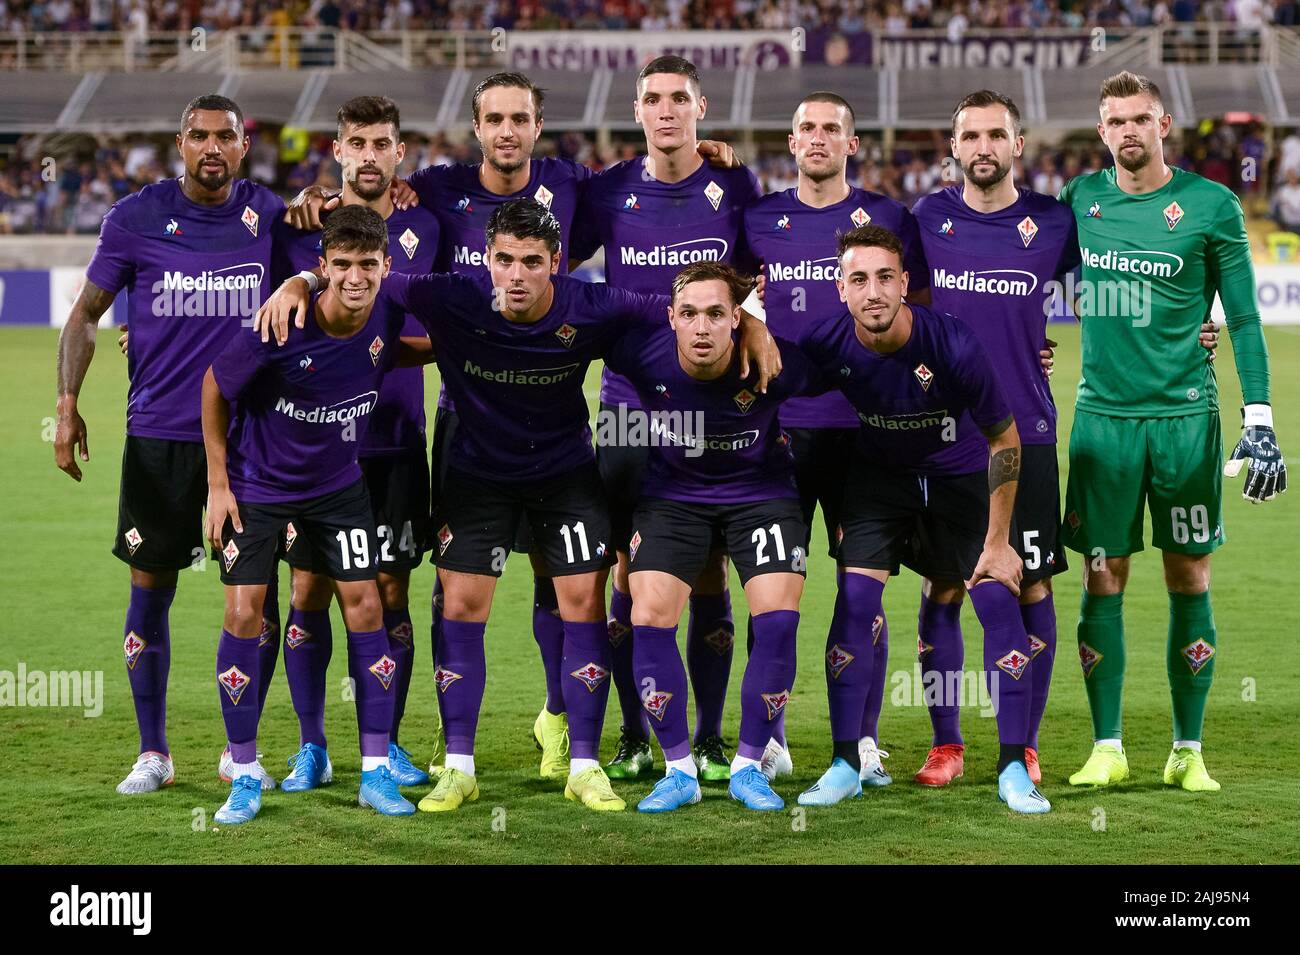 Fiorentina Team High Resolution Stock Photography and Images - Alamy